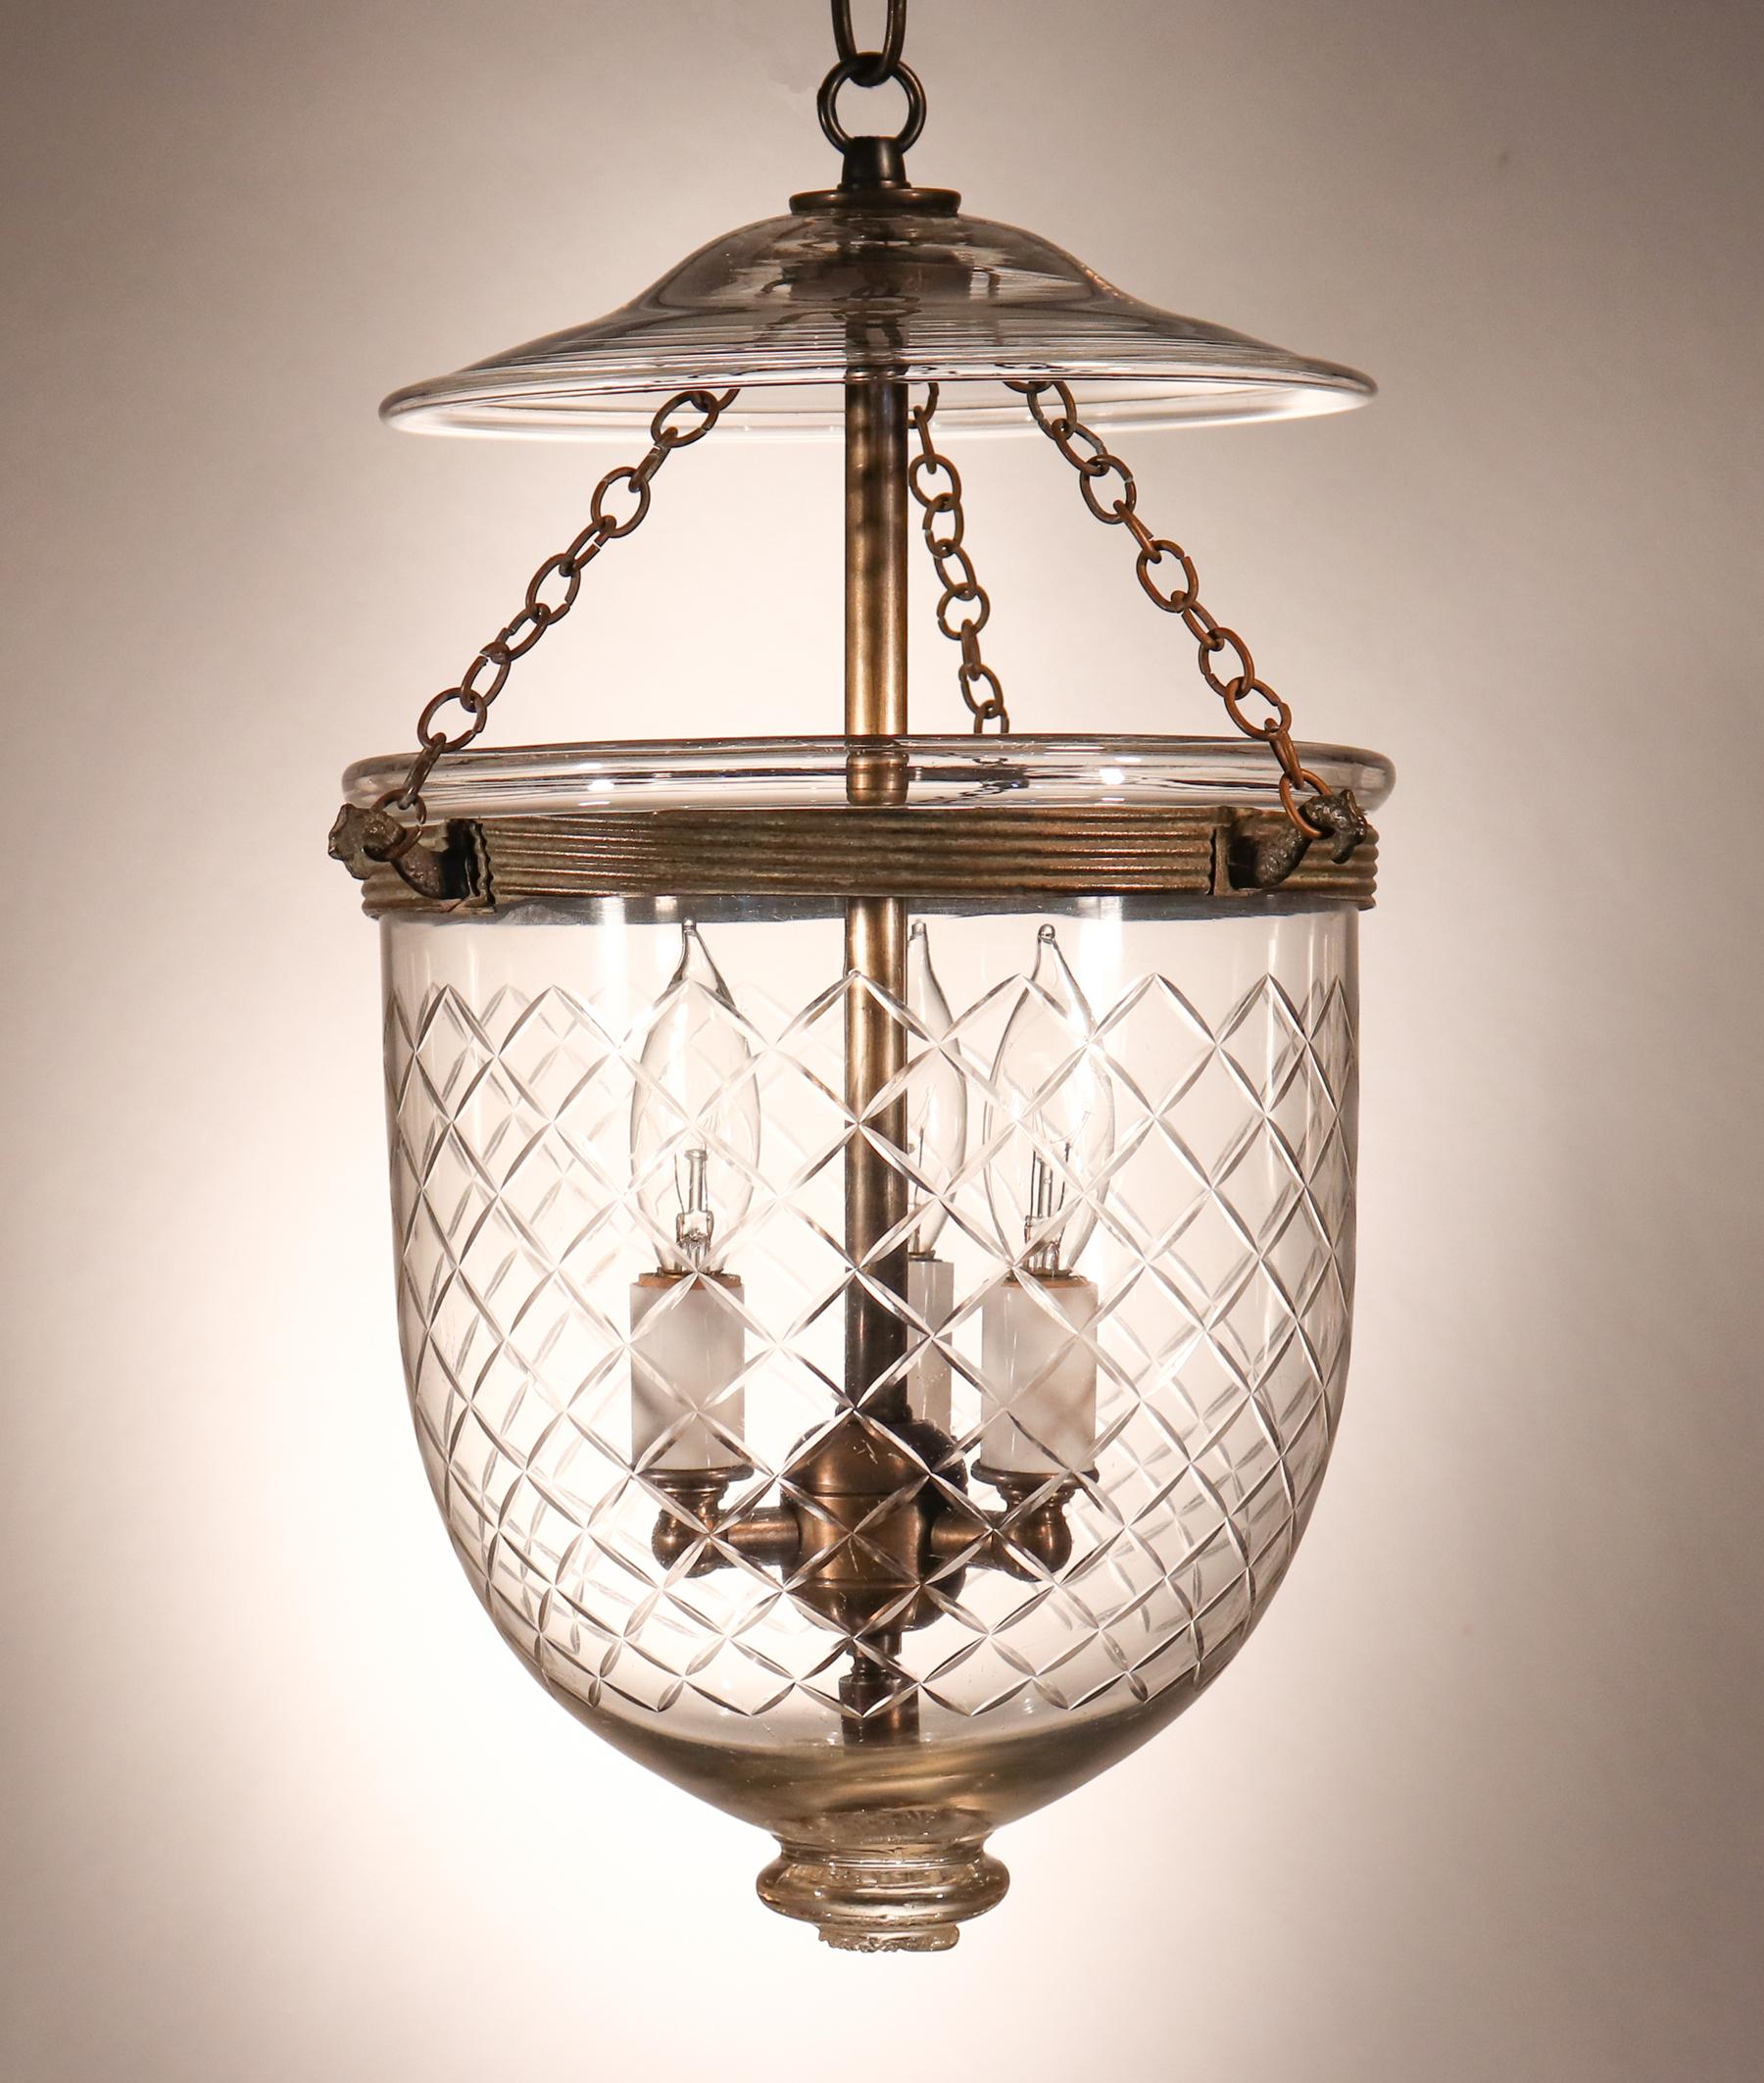 A lovely, diminutive antique English hand blown glass bell jar lantern with a Waterford-style etched, cut glass diamond motif. This circa 1880 lantern features its original rolled brass band and glass smoke bell. The light has been newly electrified